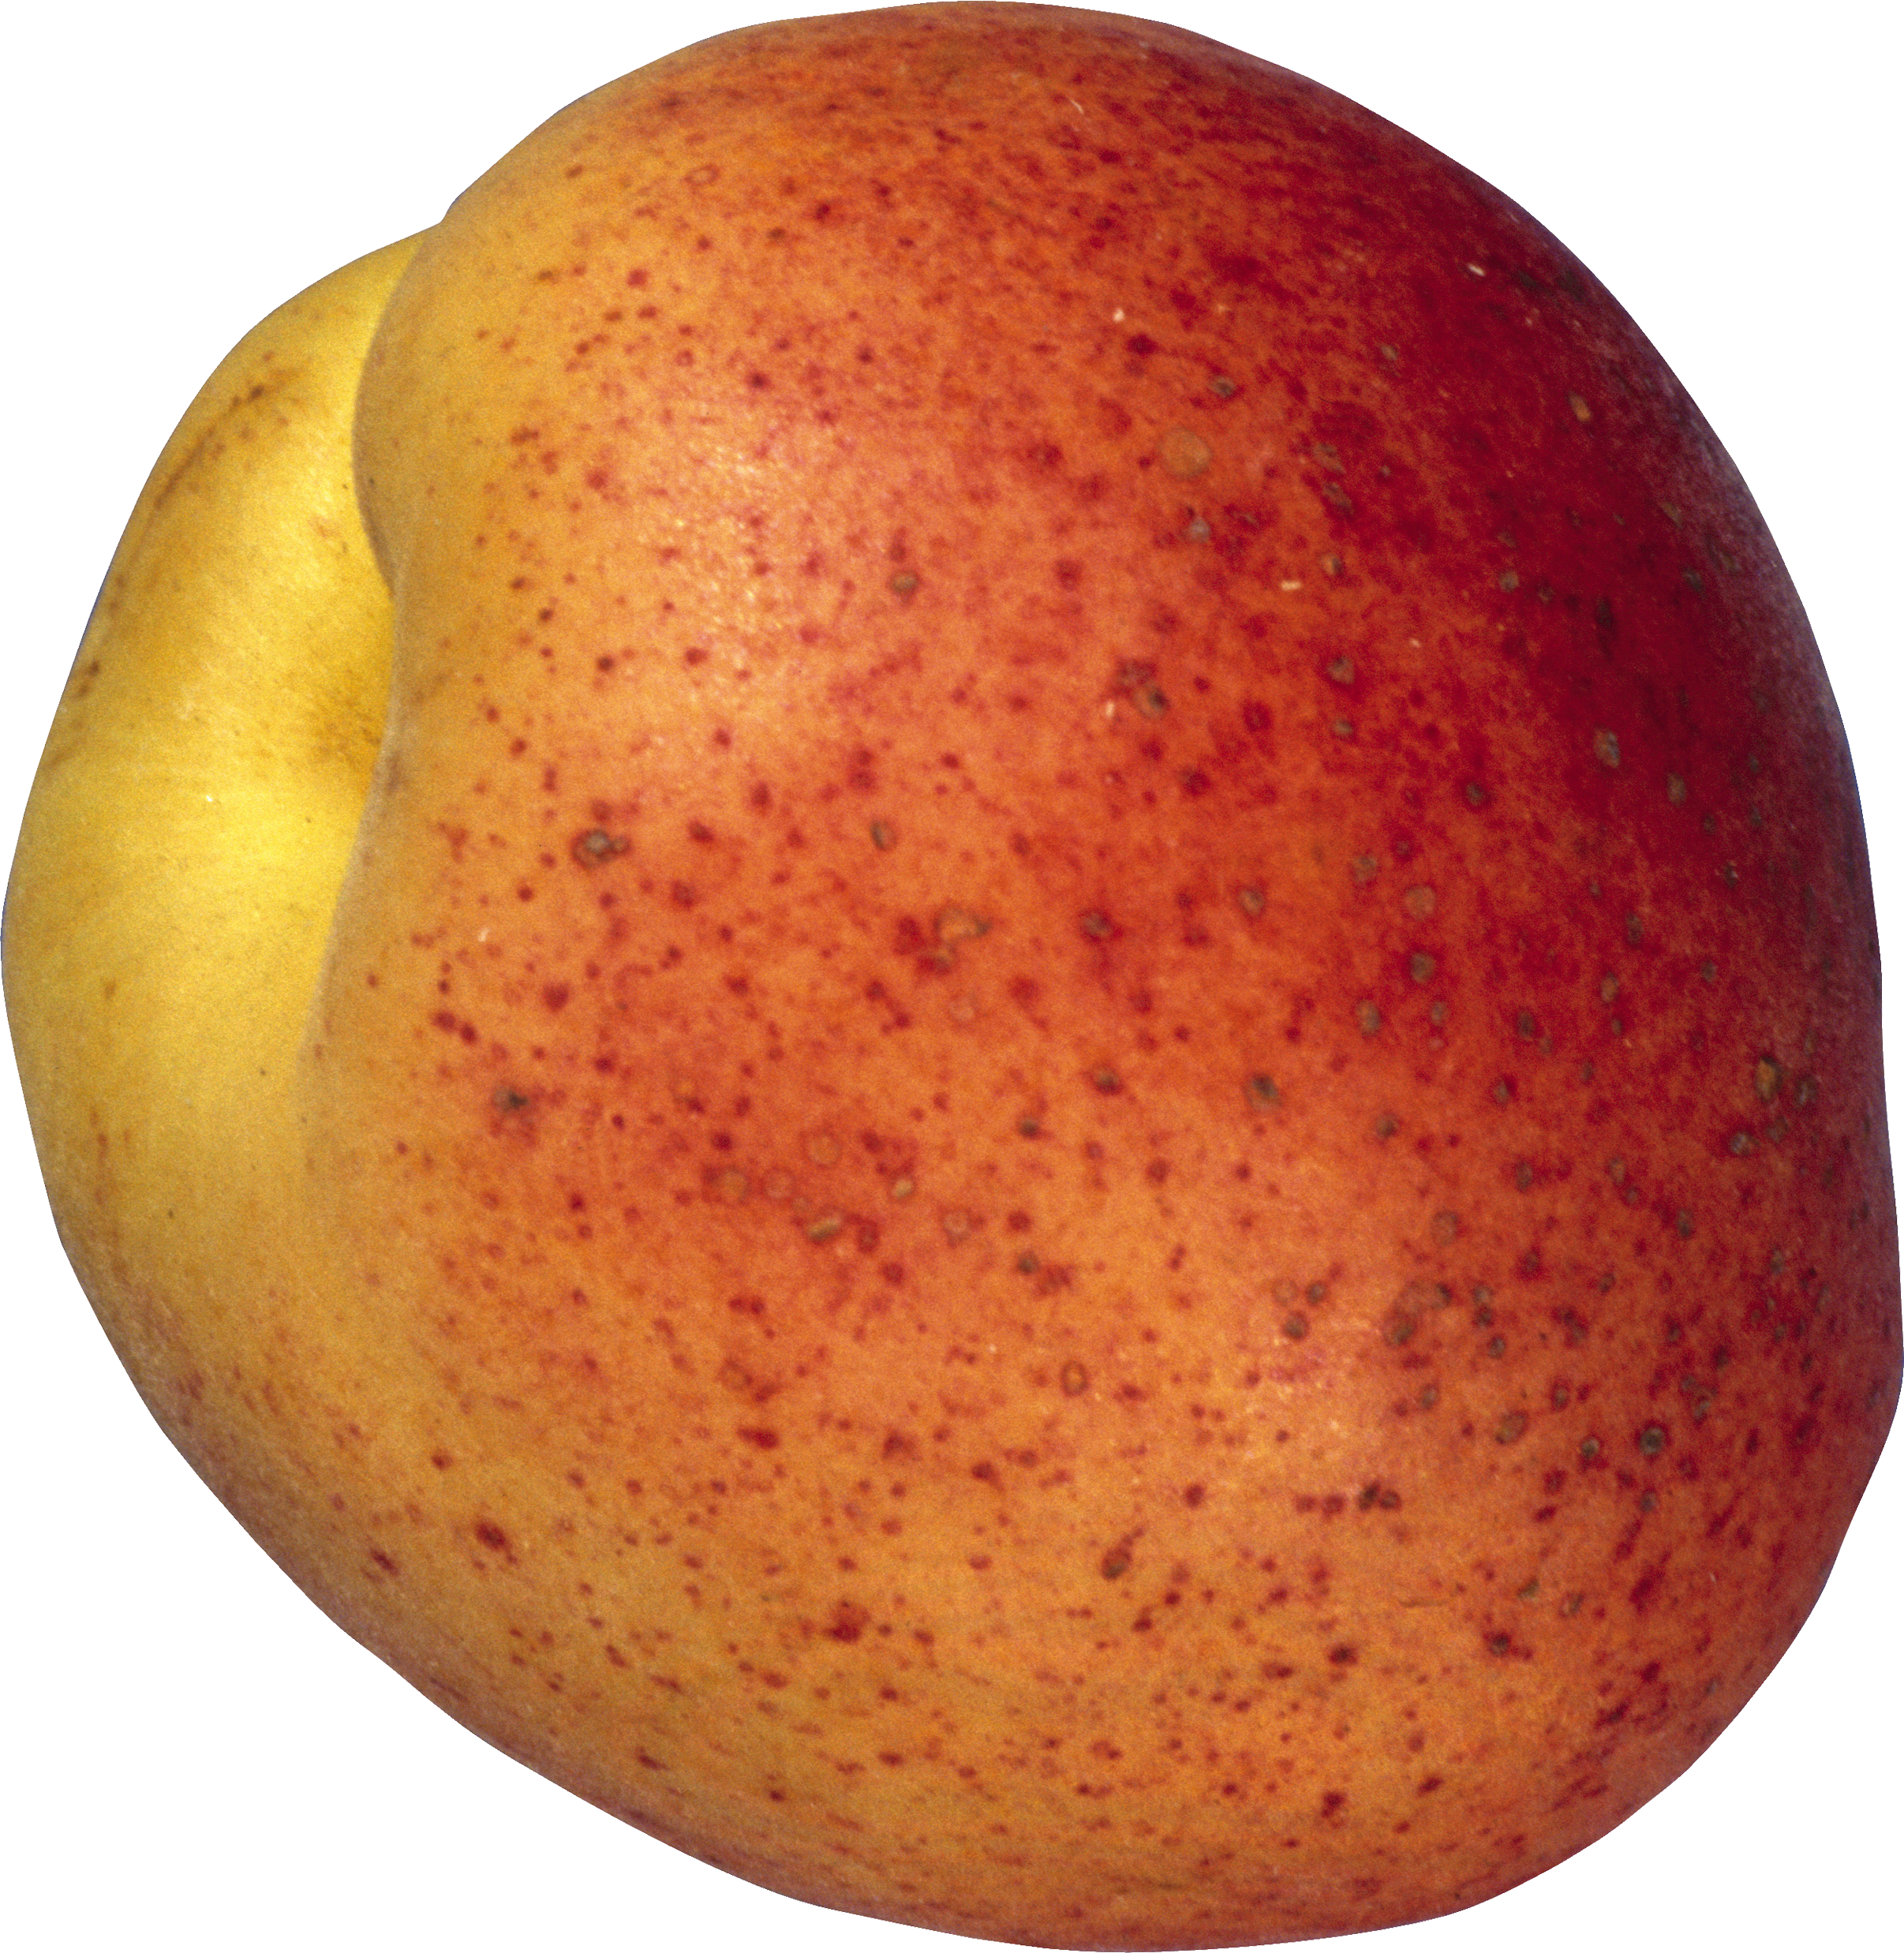 Peach PNG image